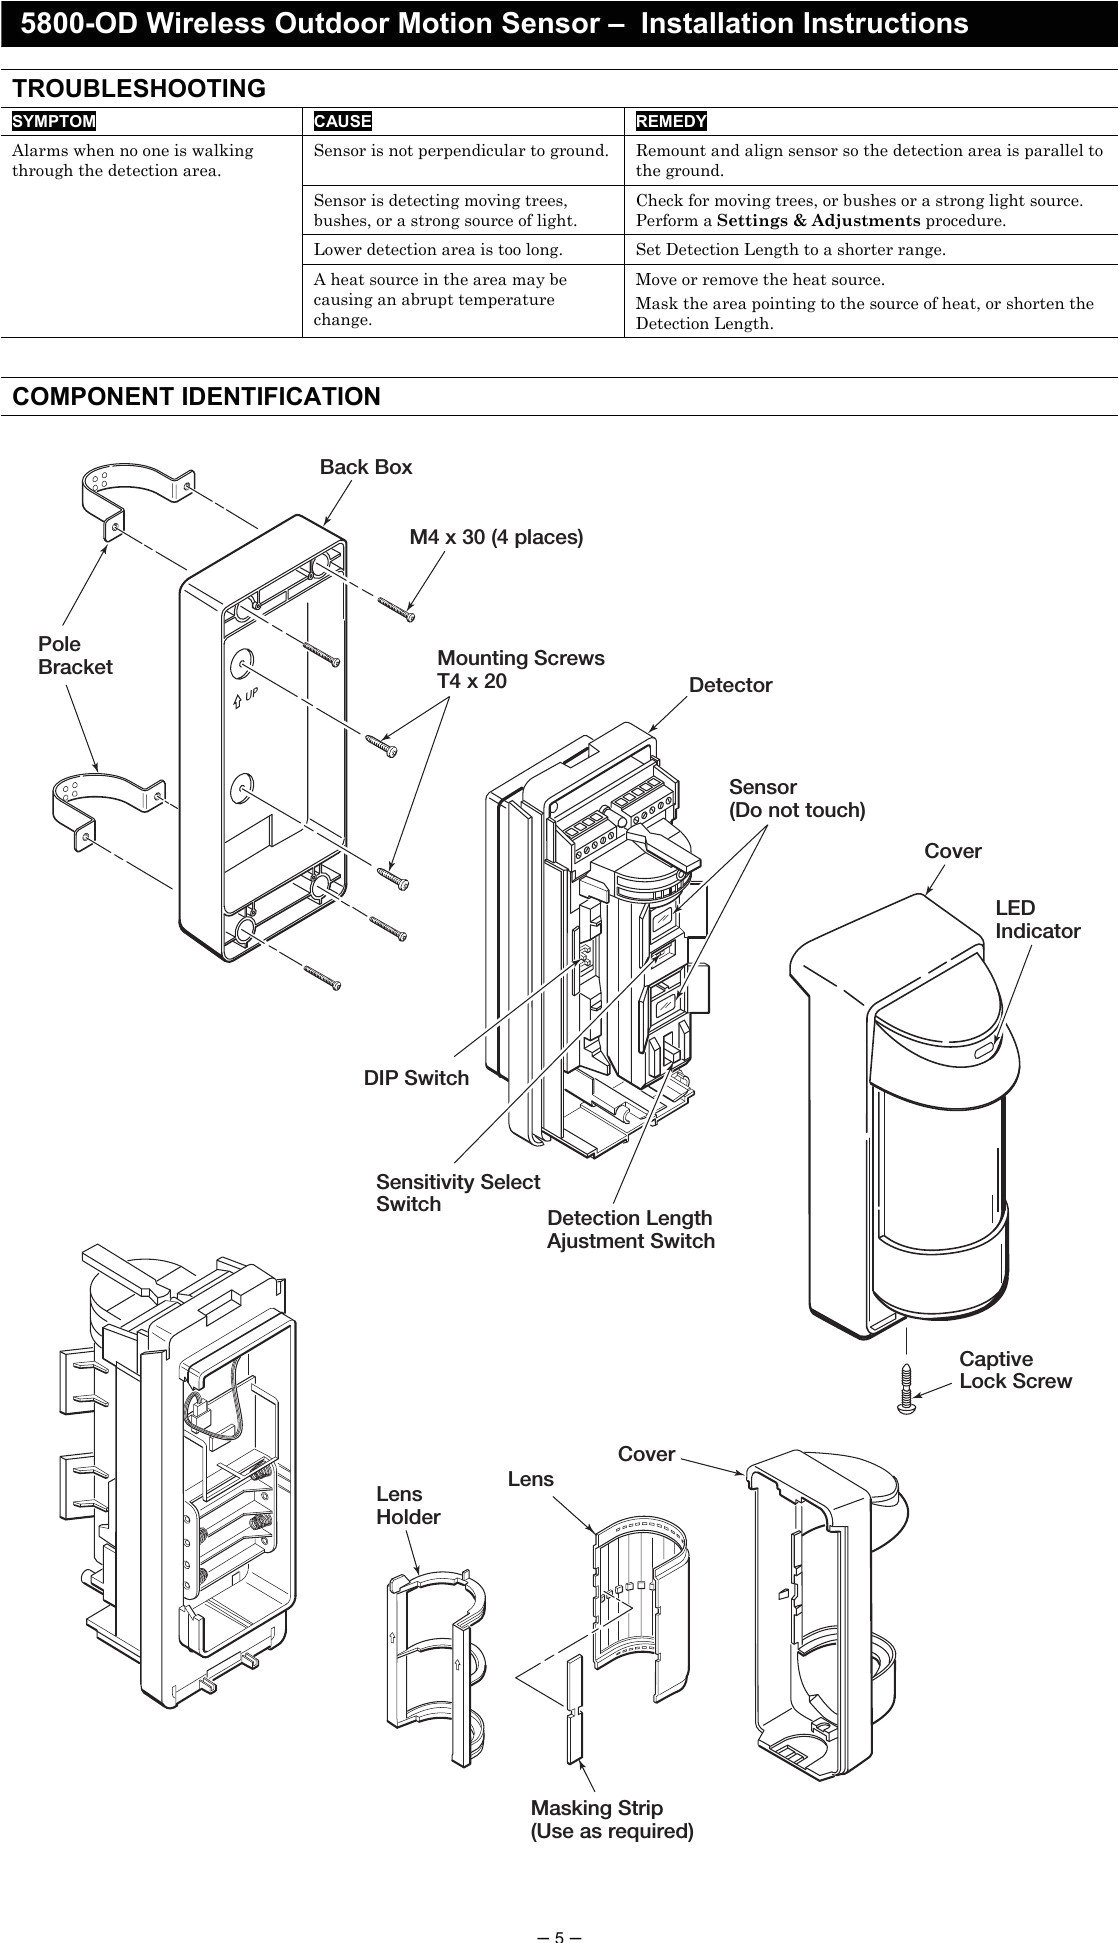 wiring diagram for outdoor motion sensor light how to